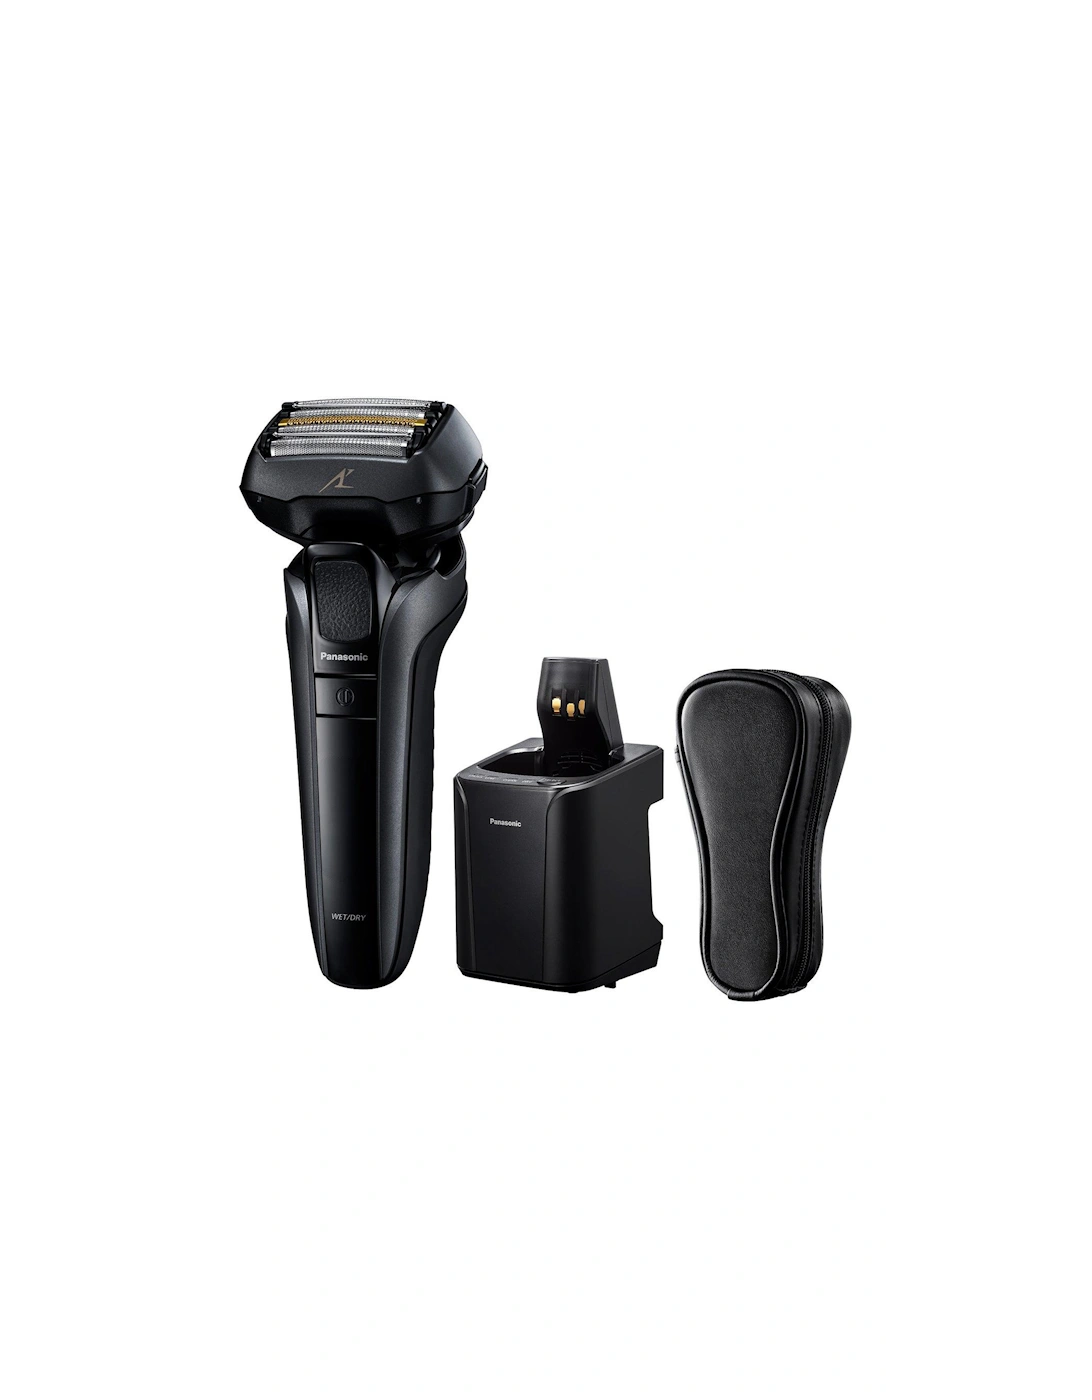 ES-LV9U Wet & Dry 5-Blade Electric Shaver for Men - Precise Clean Shaving with Cleaning & Charging Stand, 3 of 2